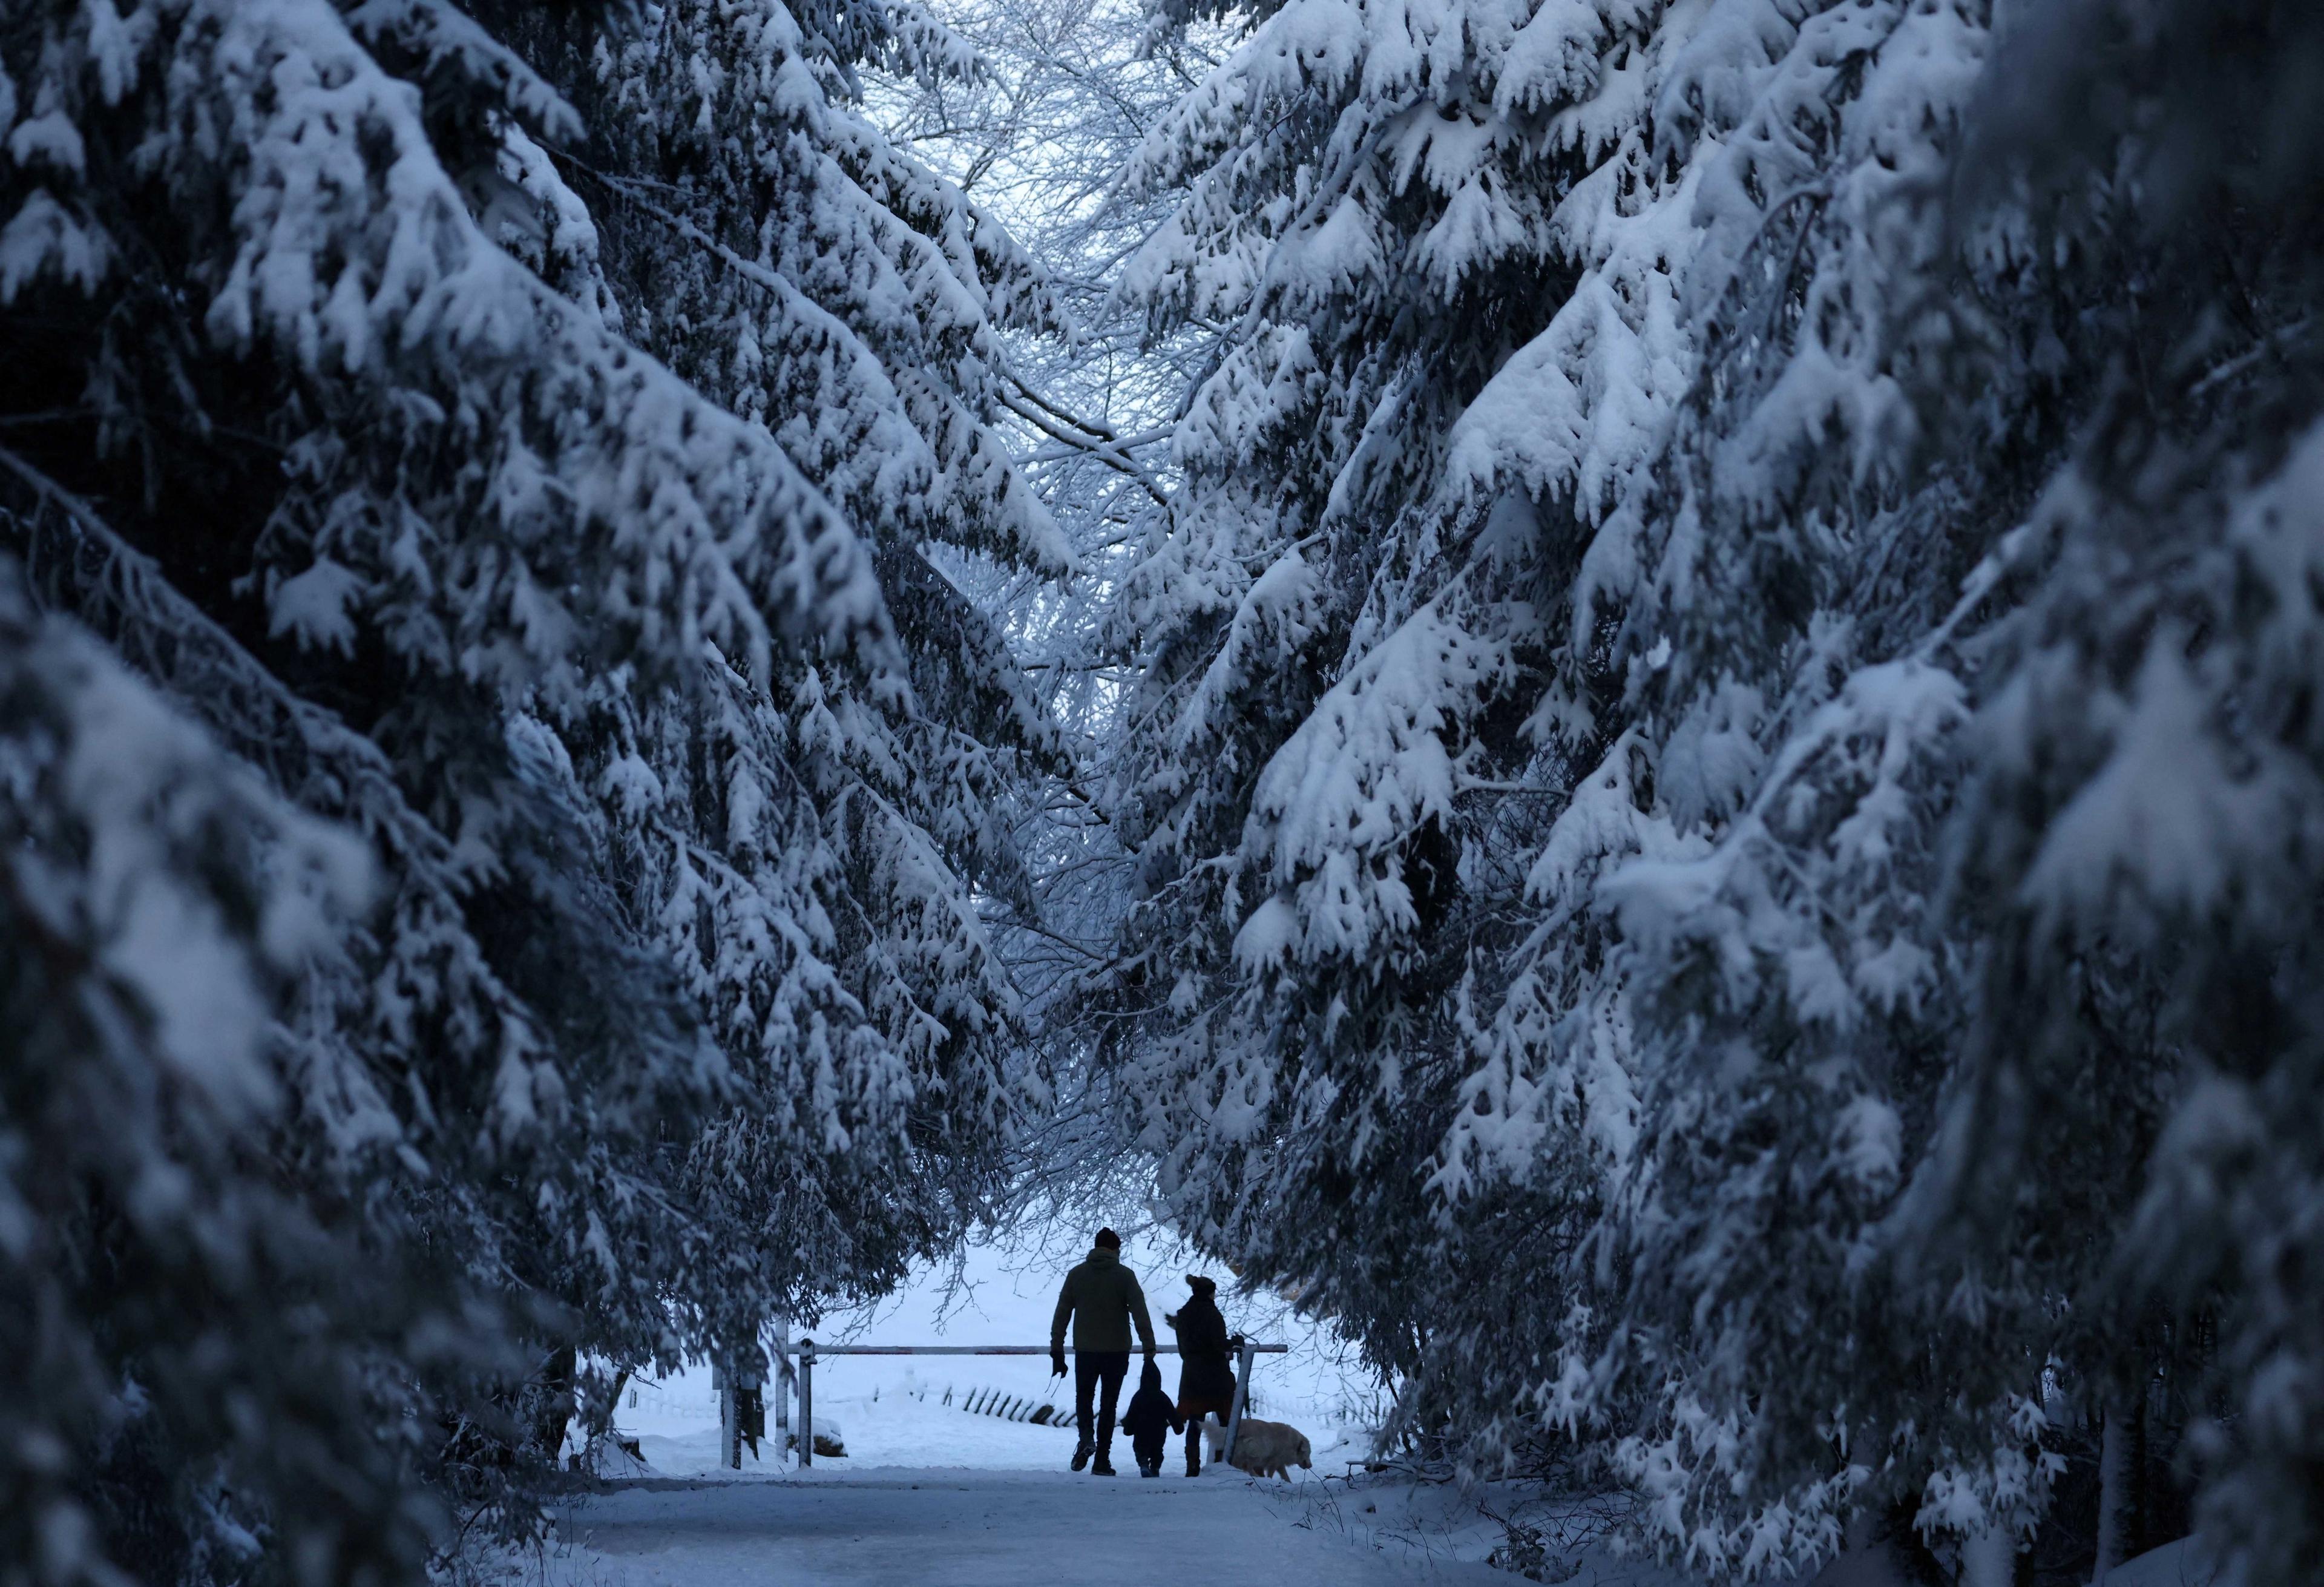 People walk among trees covered in snow, at the Signal de Botrange in the nature reserve of Les Hautes Fagnes (The High Fens), in Waimes, Belgium Jan 17. Photo: Reuters